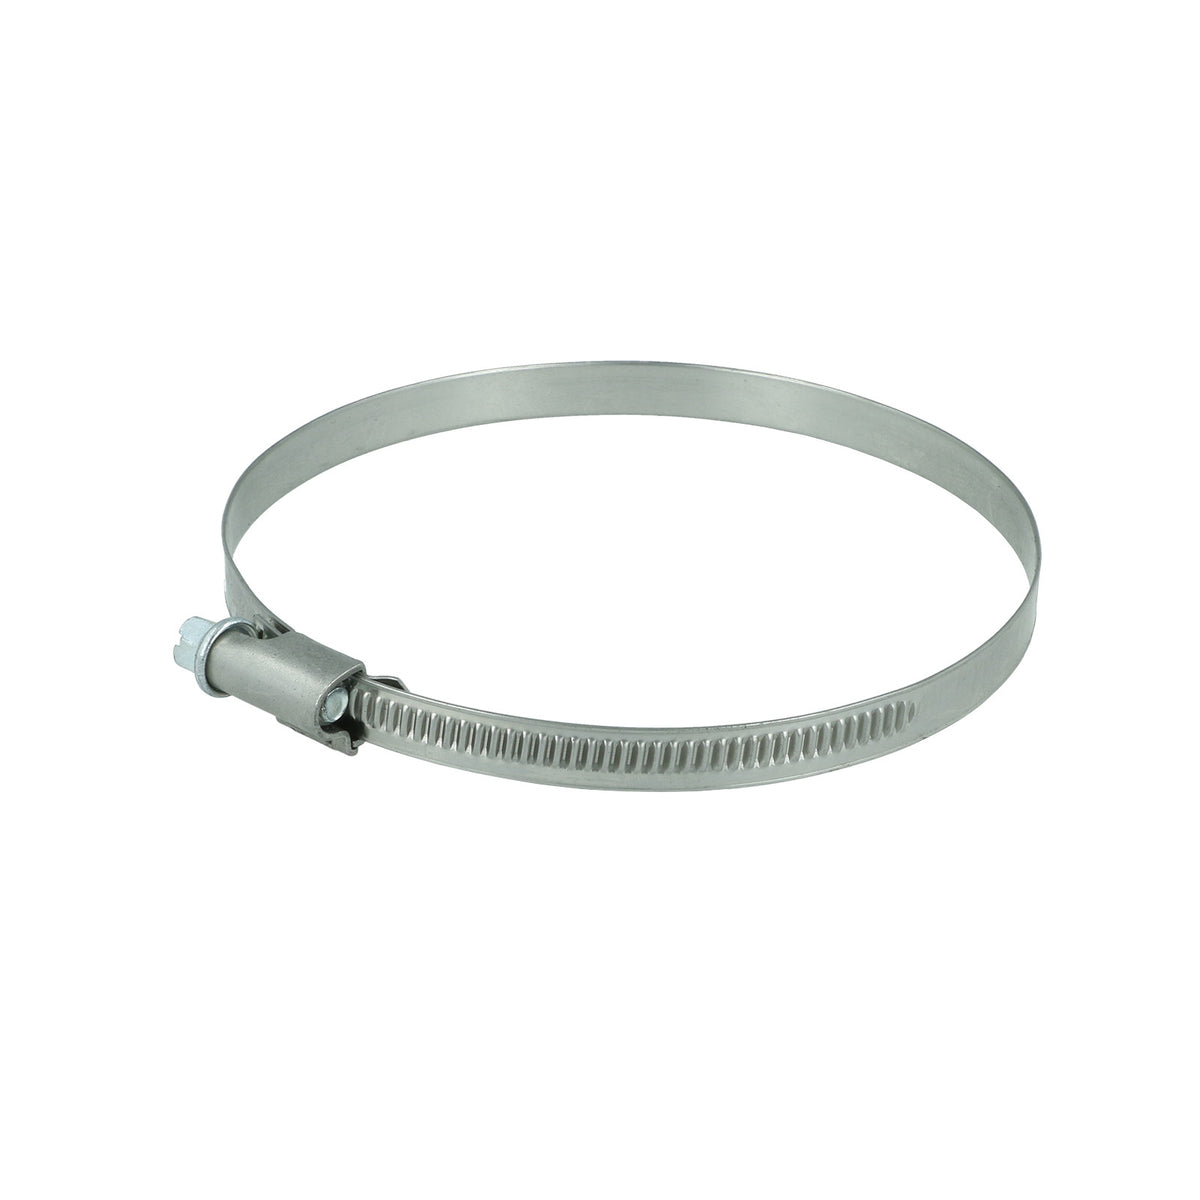 BOOST Products 1-5/8" - 2-3/8" Hose Clamp - Stainless Steel Range